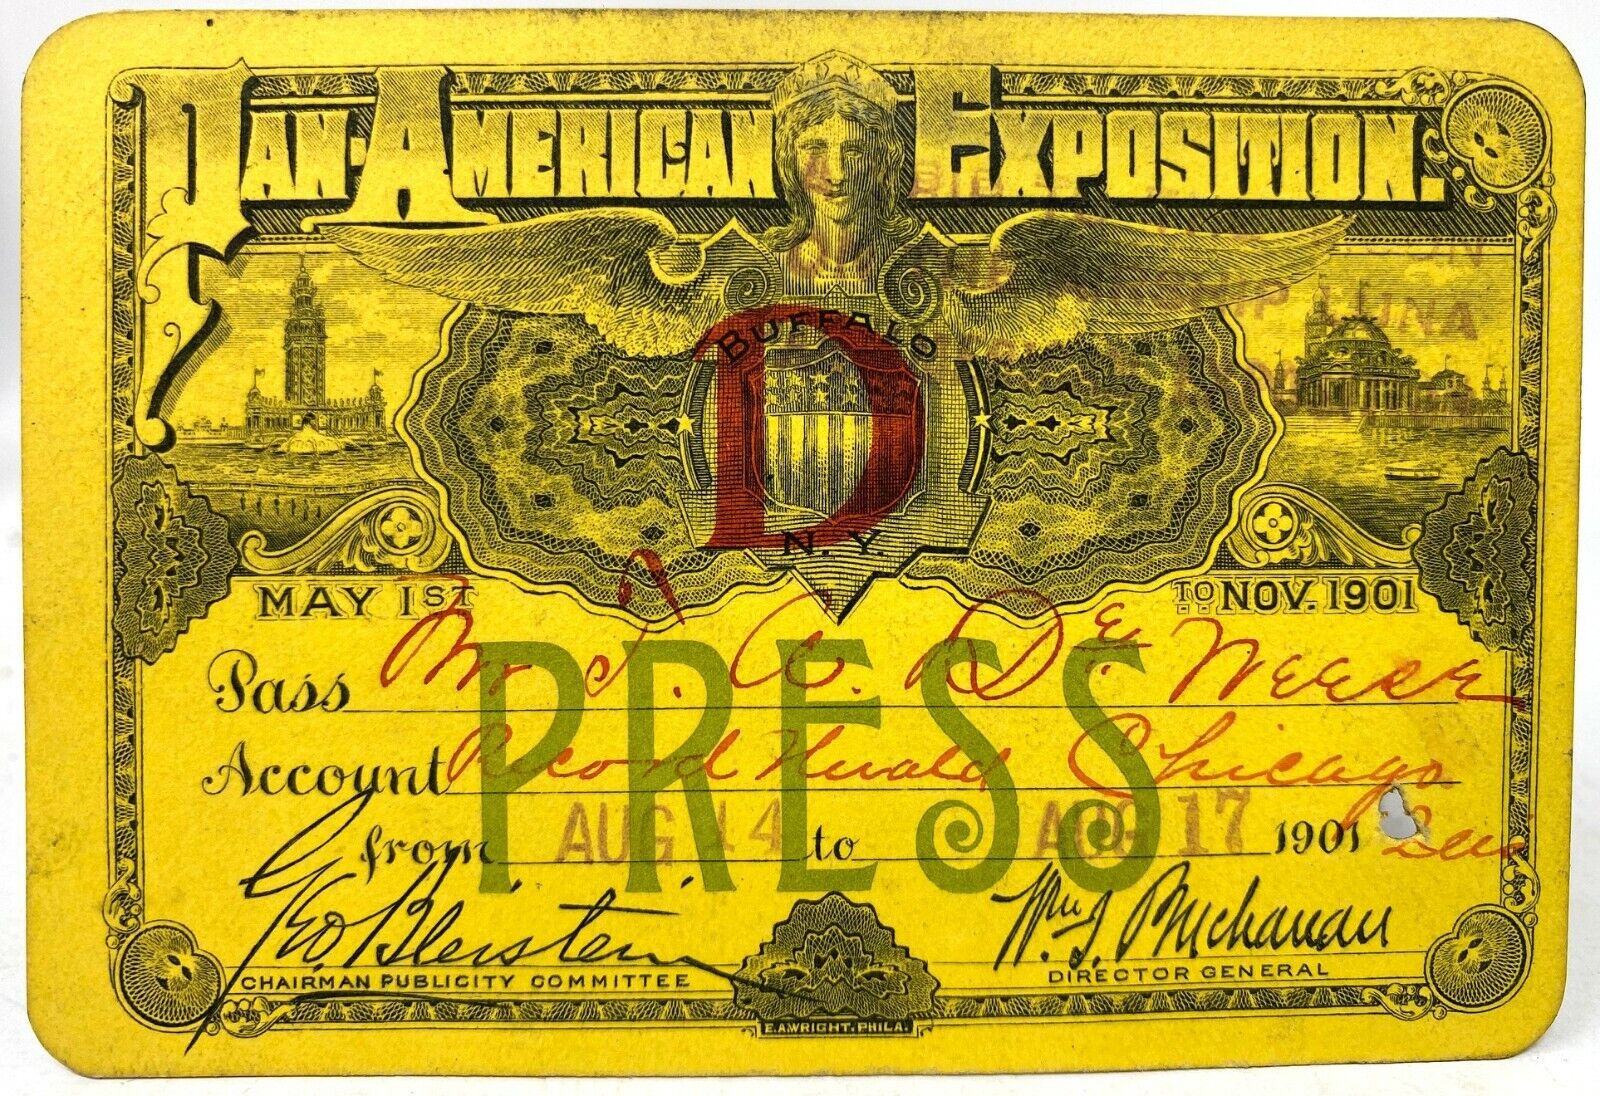 Antique 1901 Pan American Exposition Press Pass Chicago Record Herald Newspaper